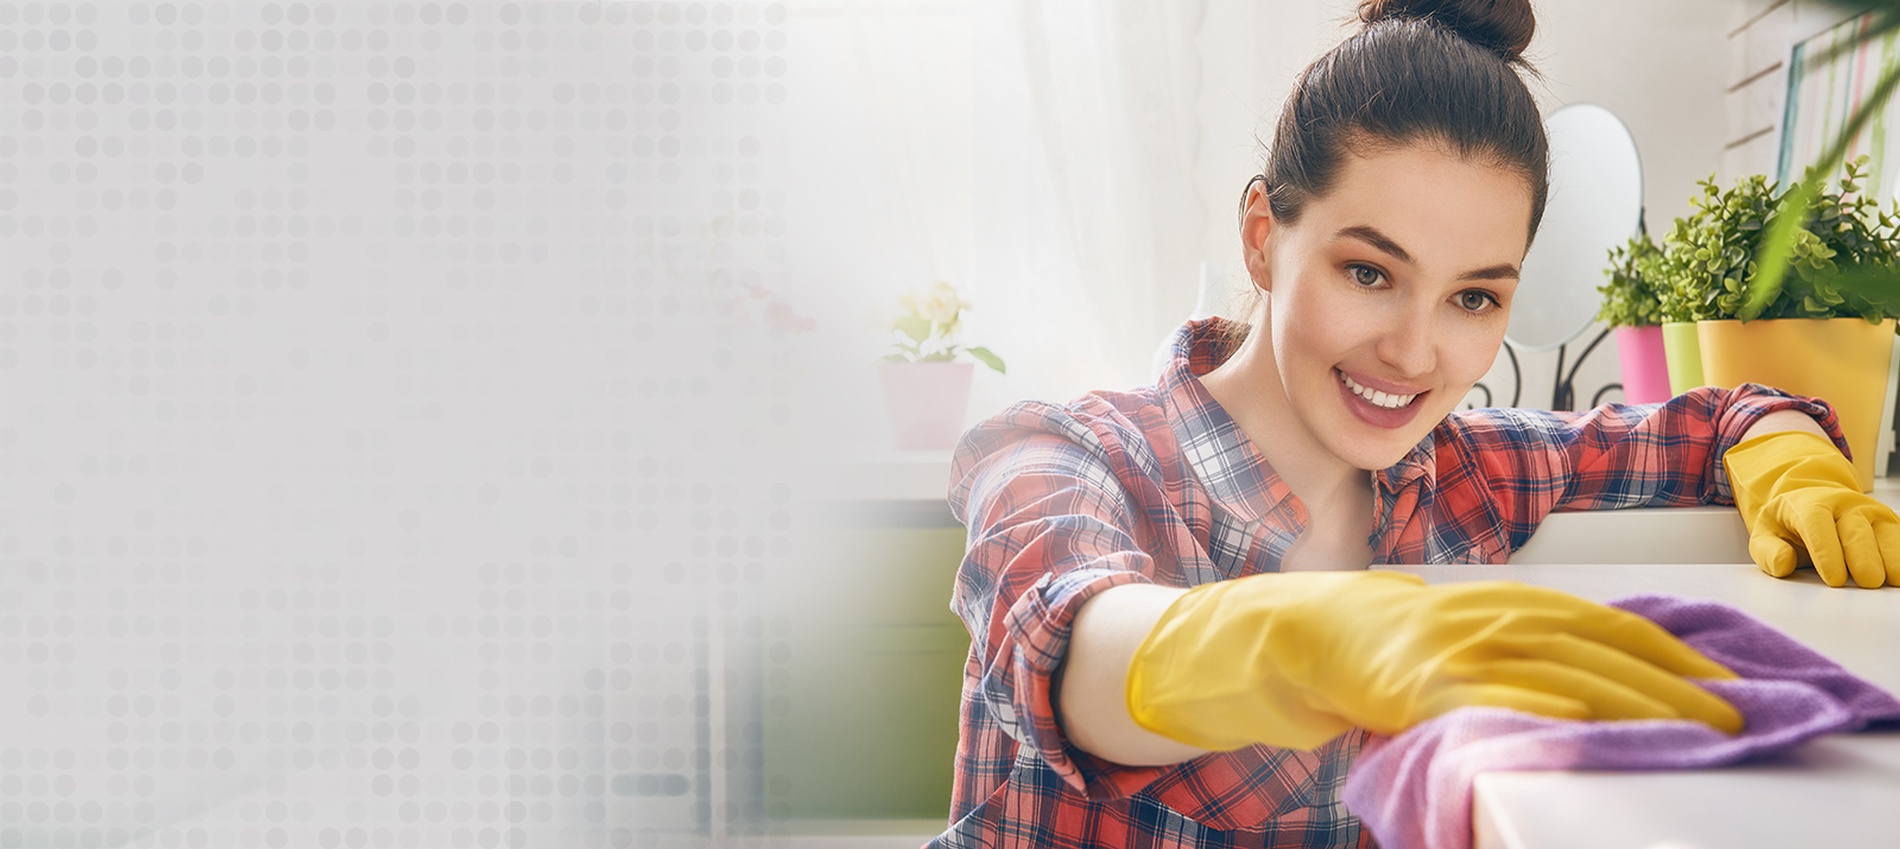 Opt for our Deep Cleaning Services to give your loved ones a healthier and more refreshed home environment